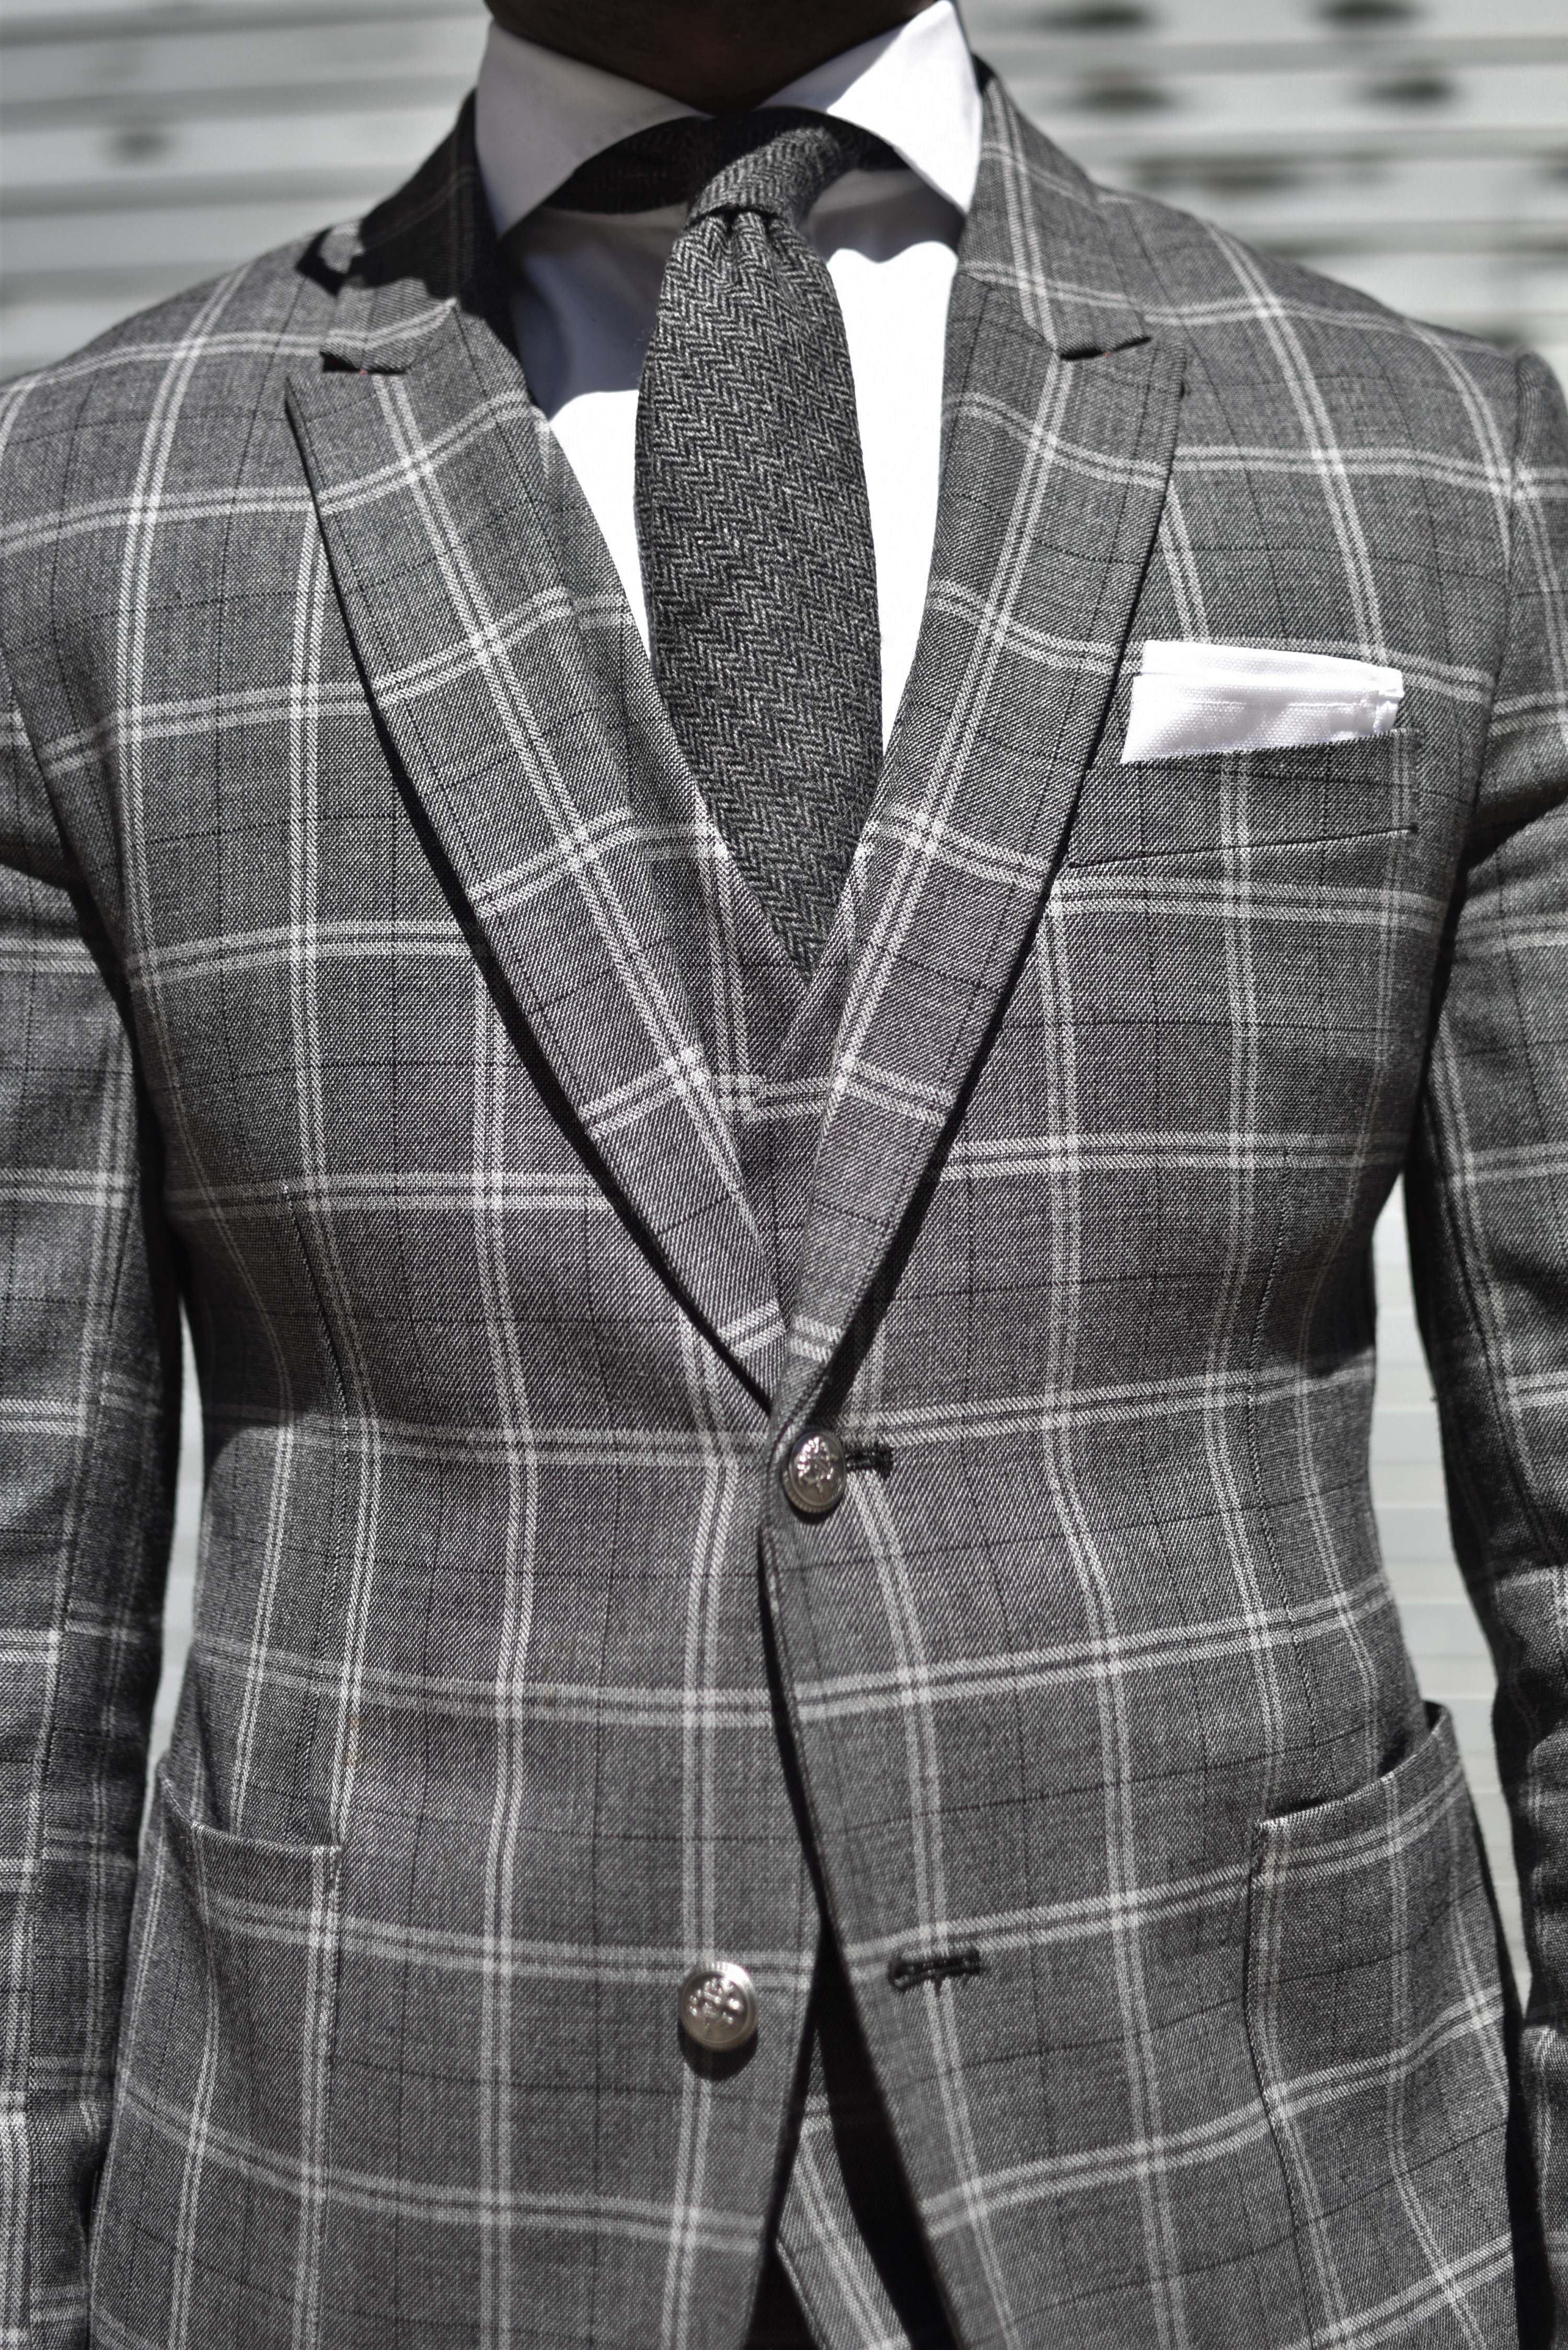 Grey + Plaid + Brass: This Spring's Bold Suit Part I | Men's Style Pro ...